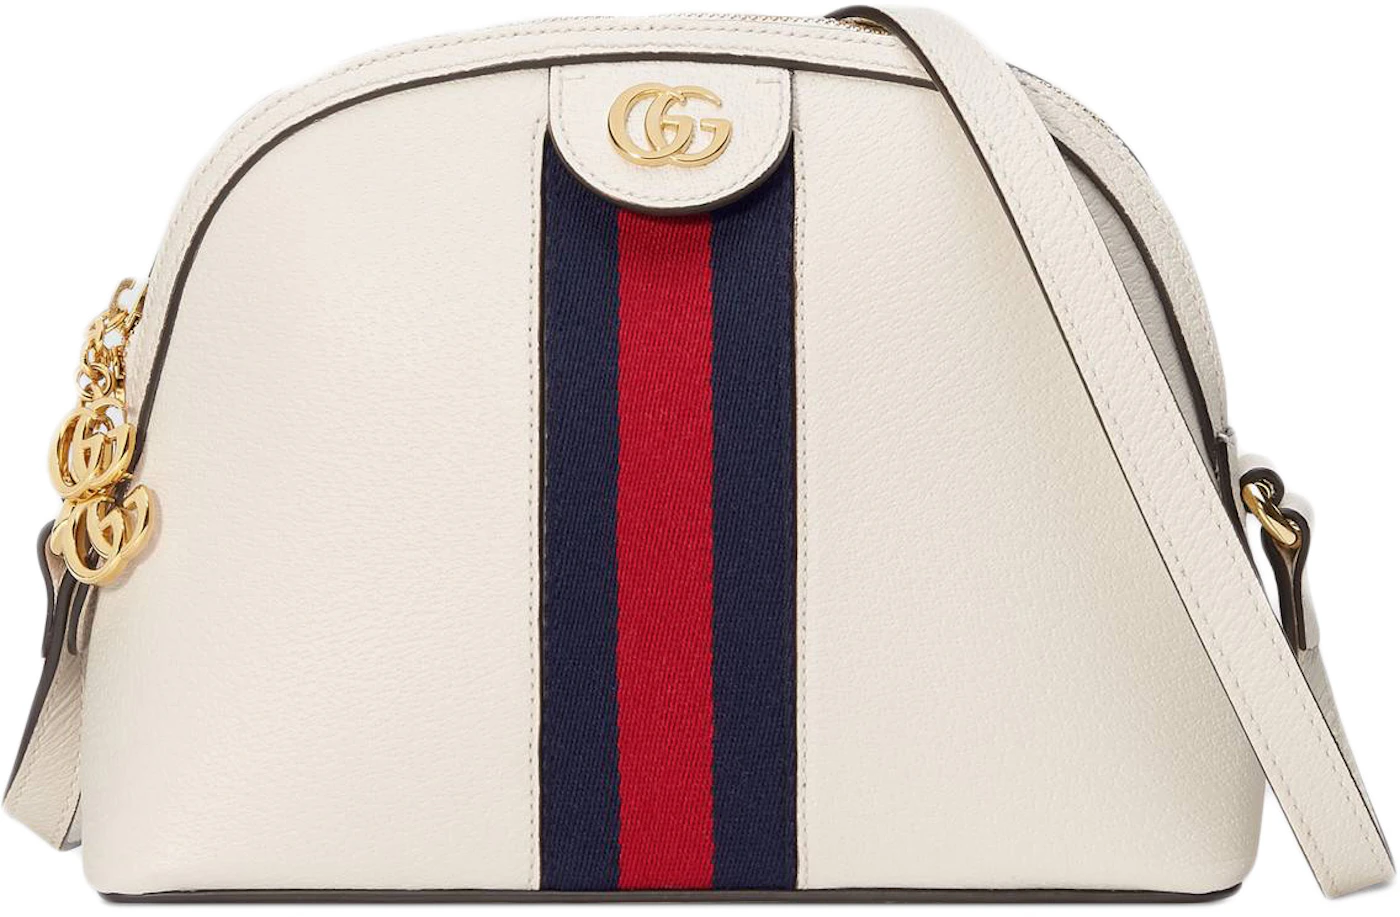 Gucci Ophidia Small Shoulder Bag in White